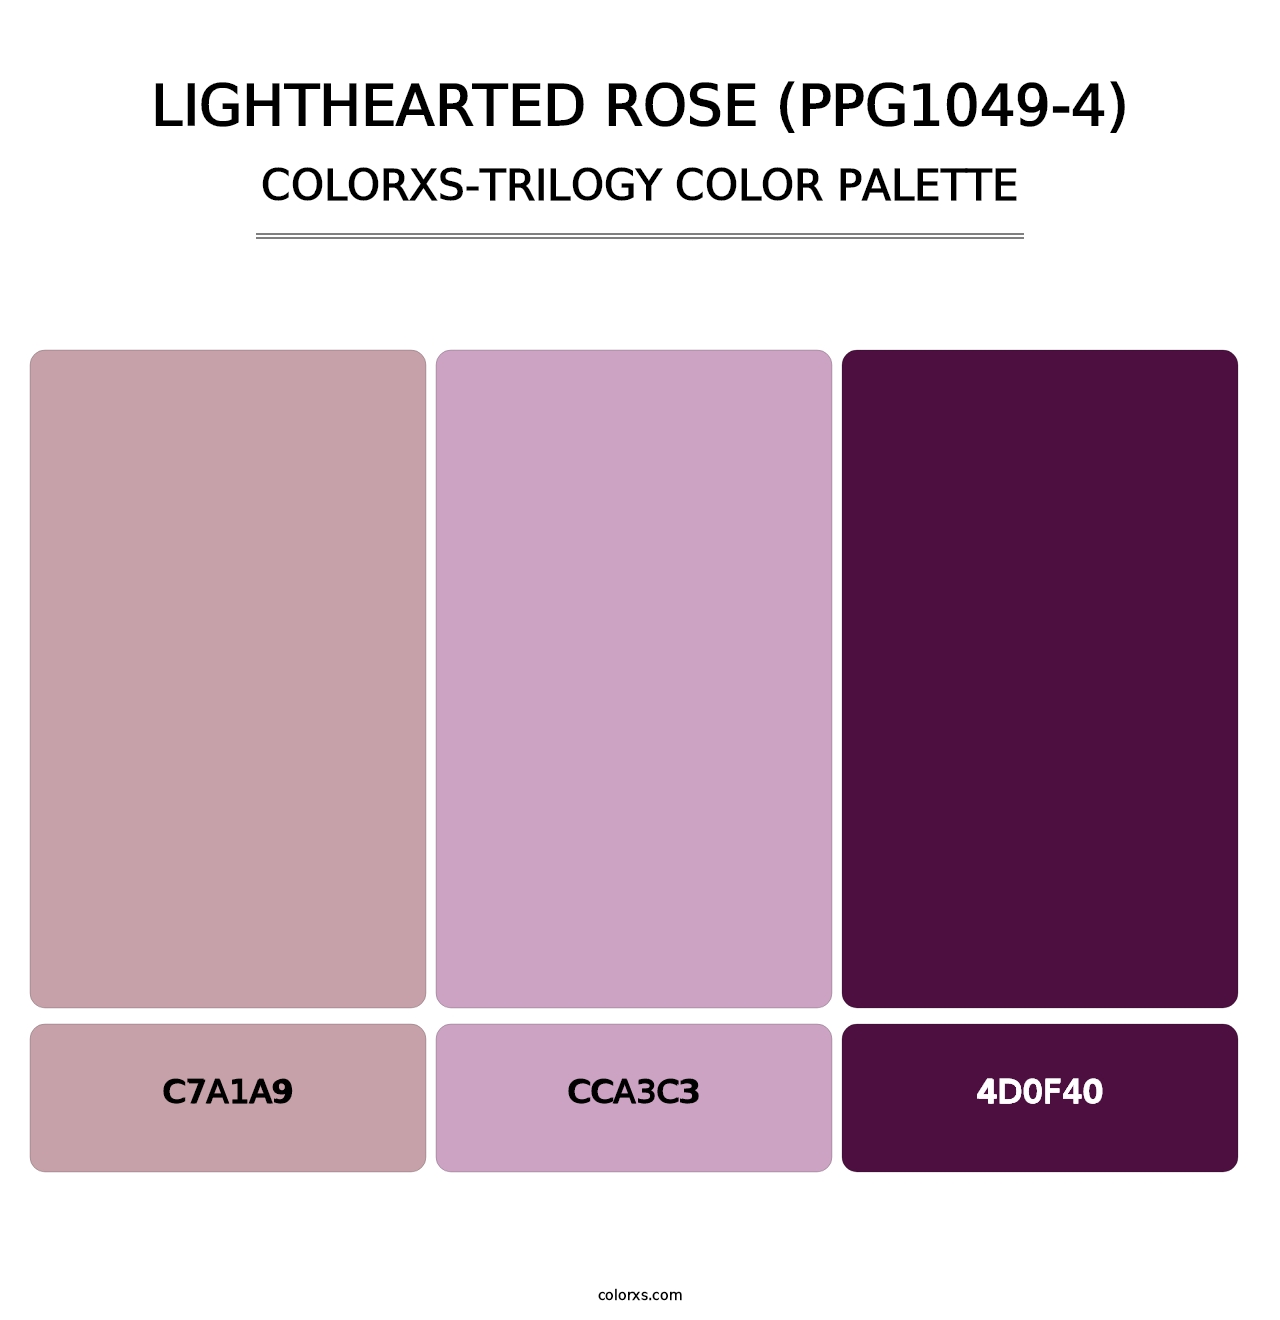 Lighthearted Rose (PPG1049-4) - Colorxs Trilogy Palette